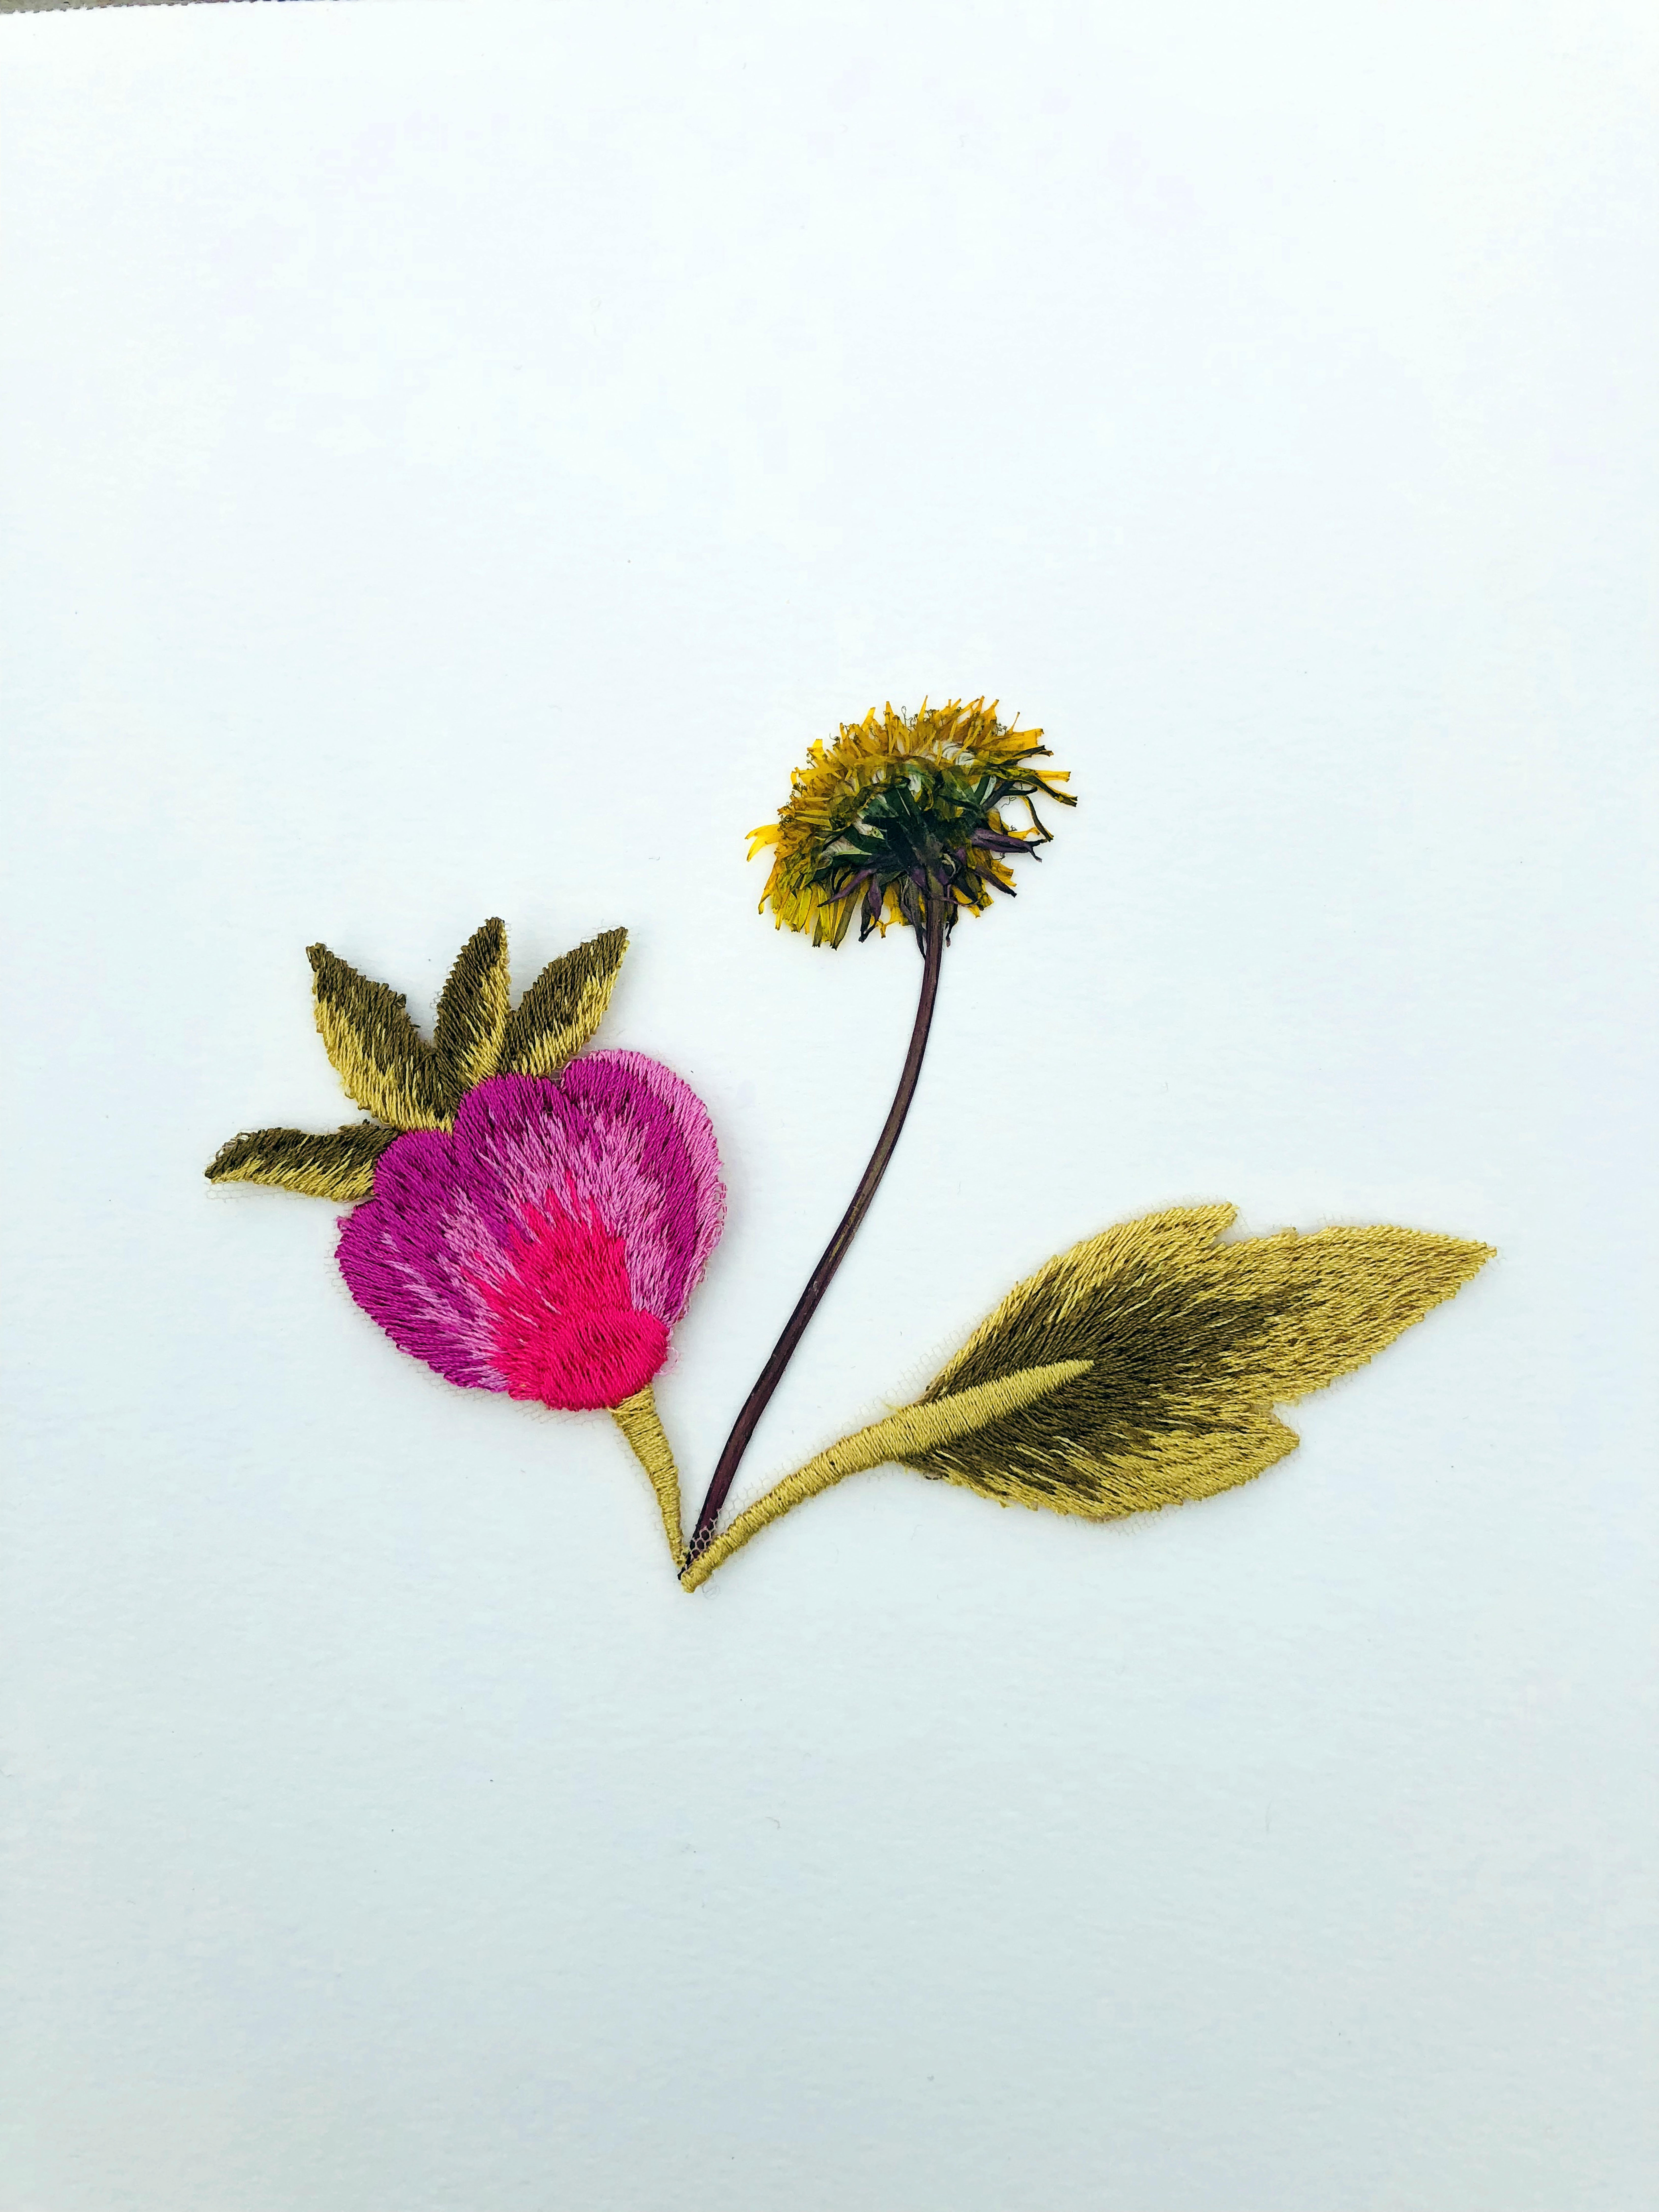 Jil Weinstock, Unwanted Collaborator (bright pinks, red, olive green, army green and yellow flower), 2020, Plant life, thread, adhesive and rag paper, 10 x 8 1/2 inches